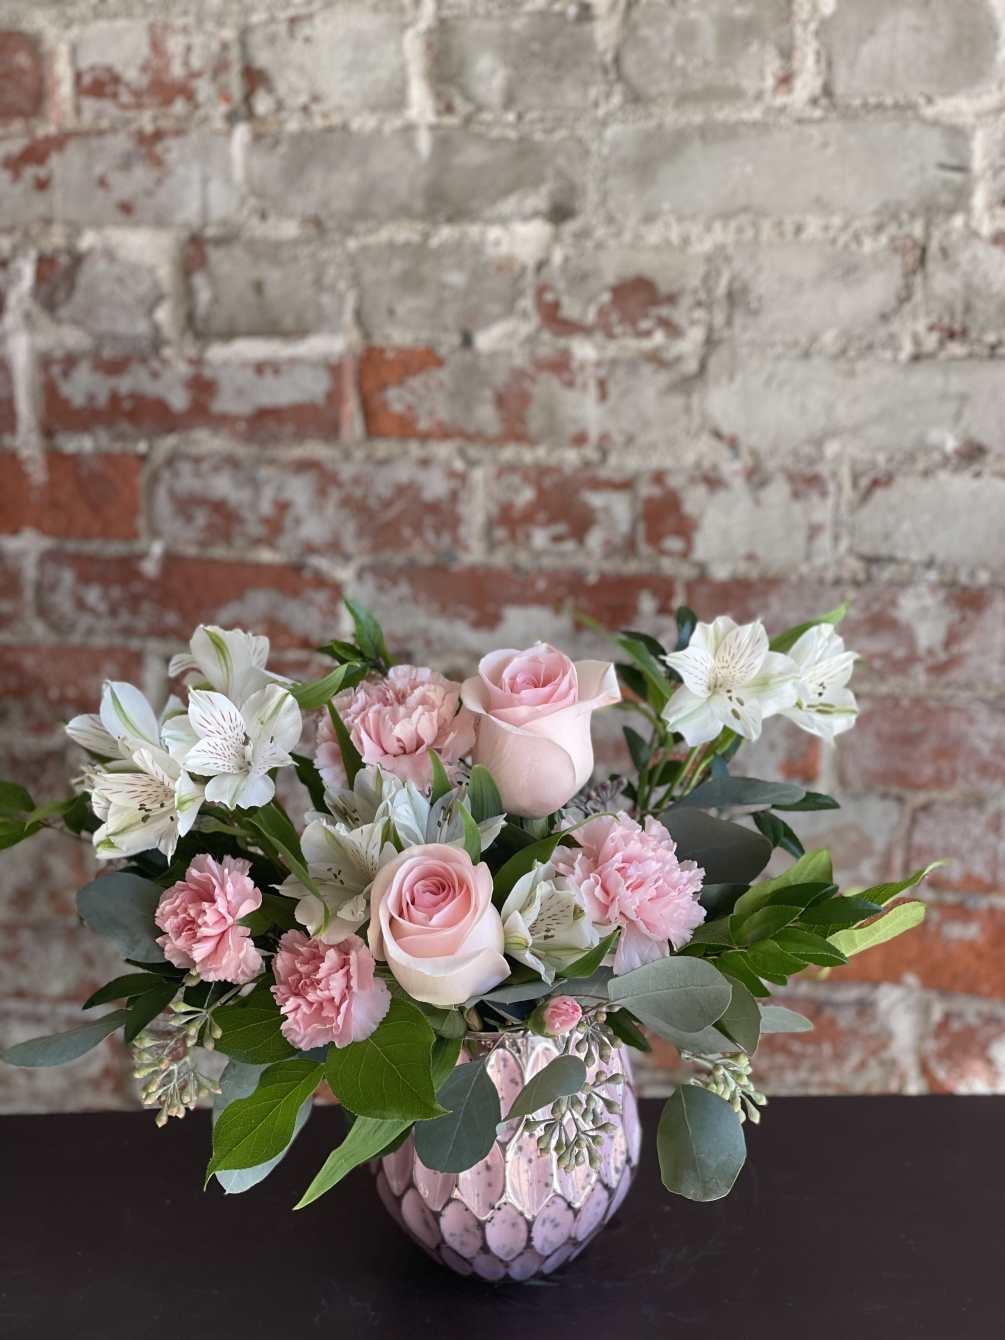 Soft and sweet, this pastel pink rose bouquet gets the glam treatment